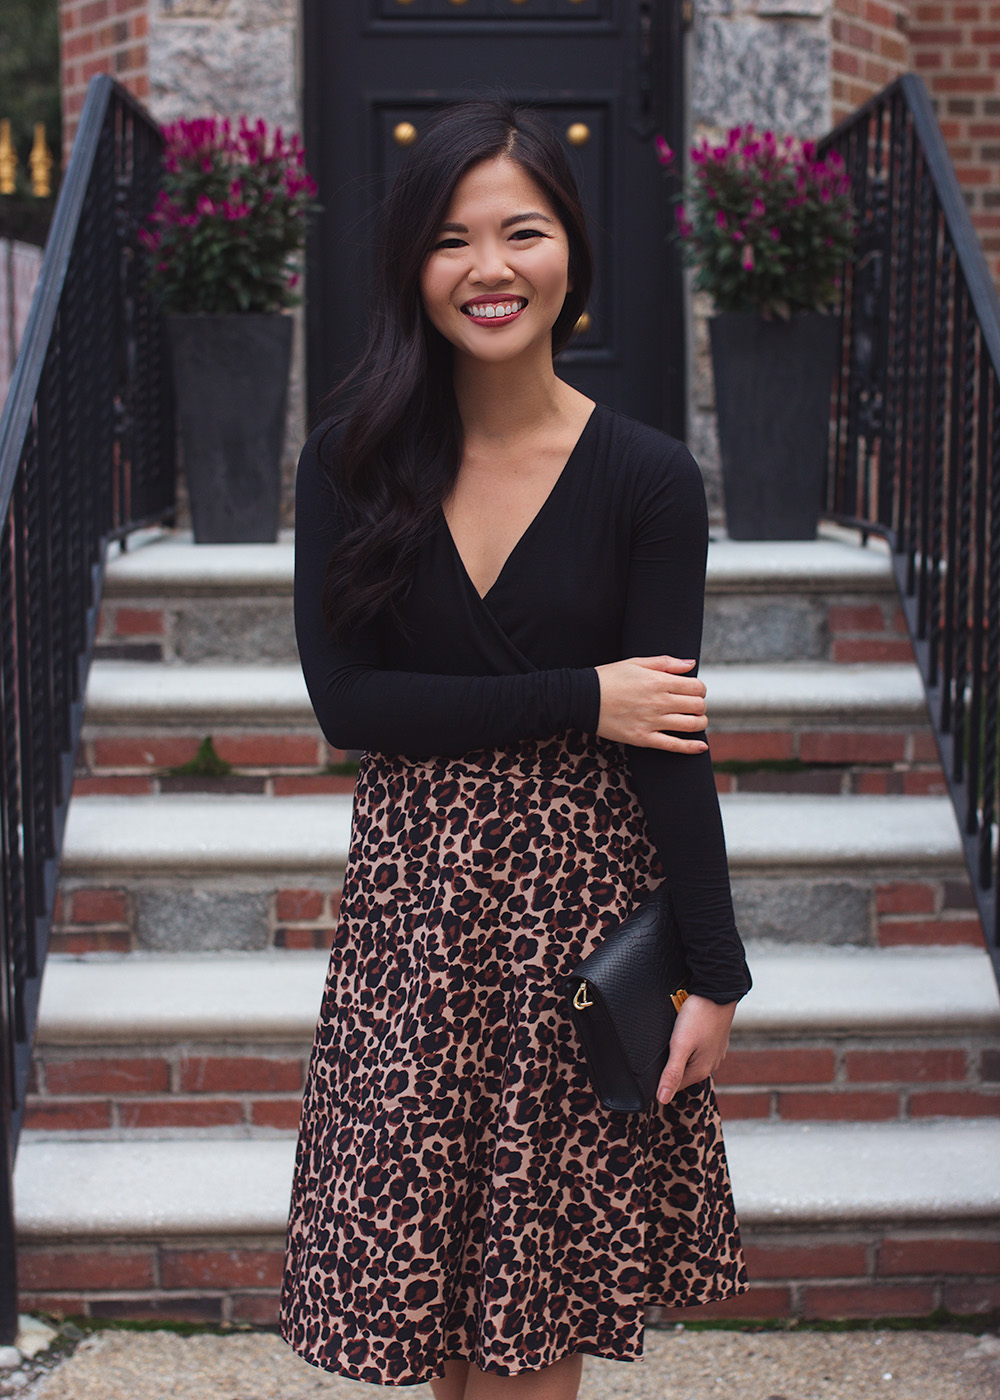 How to Wear Leopard Print in Your 30s